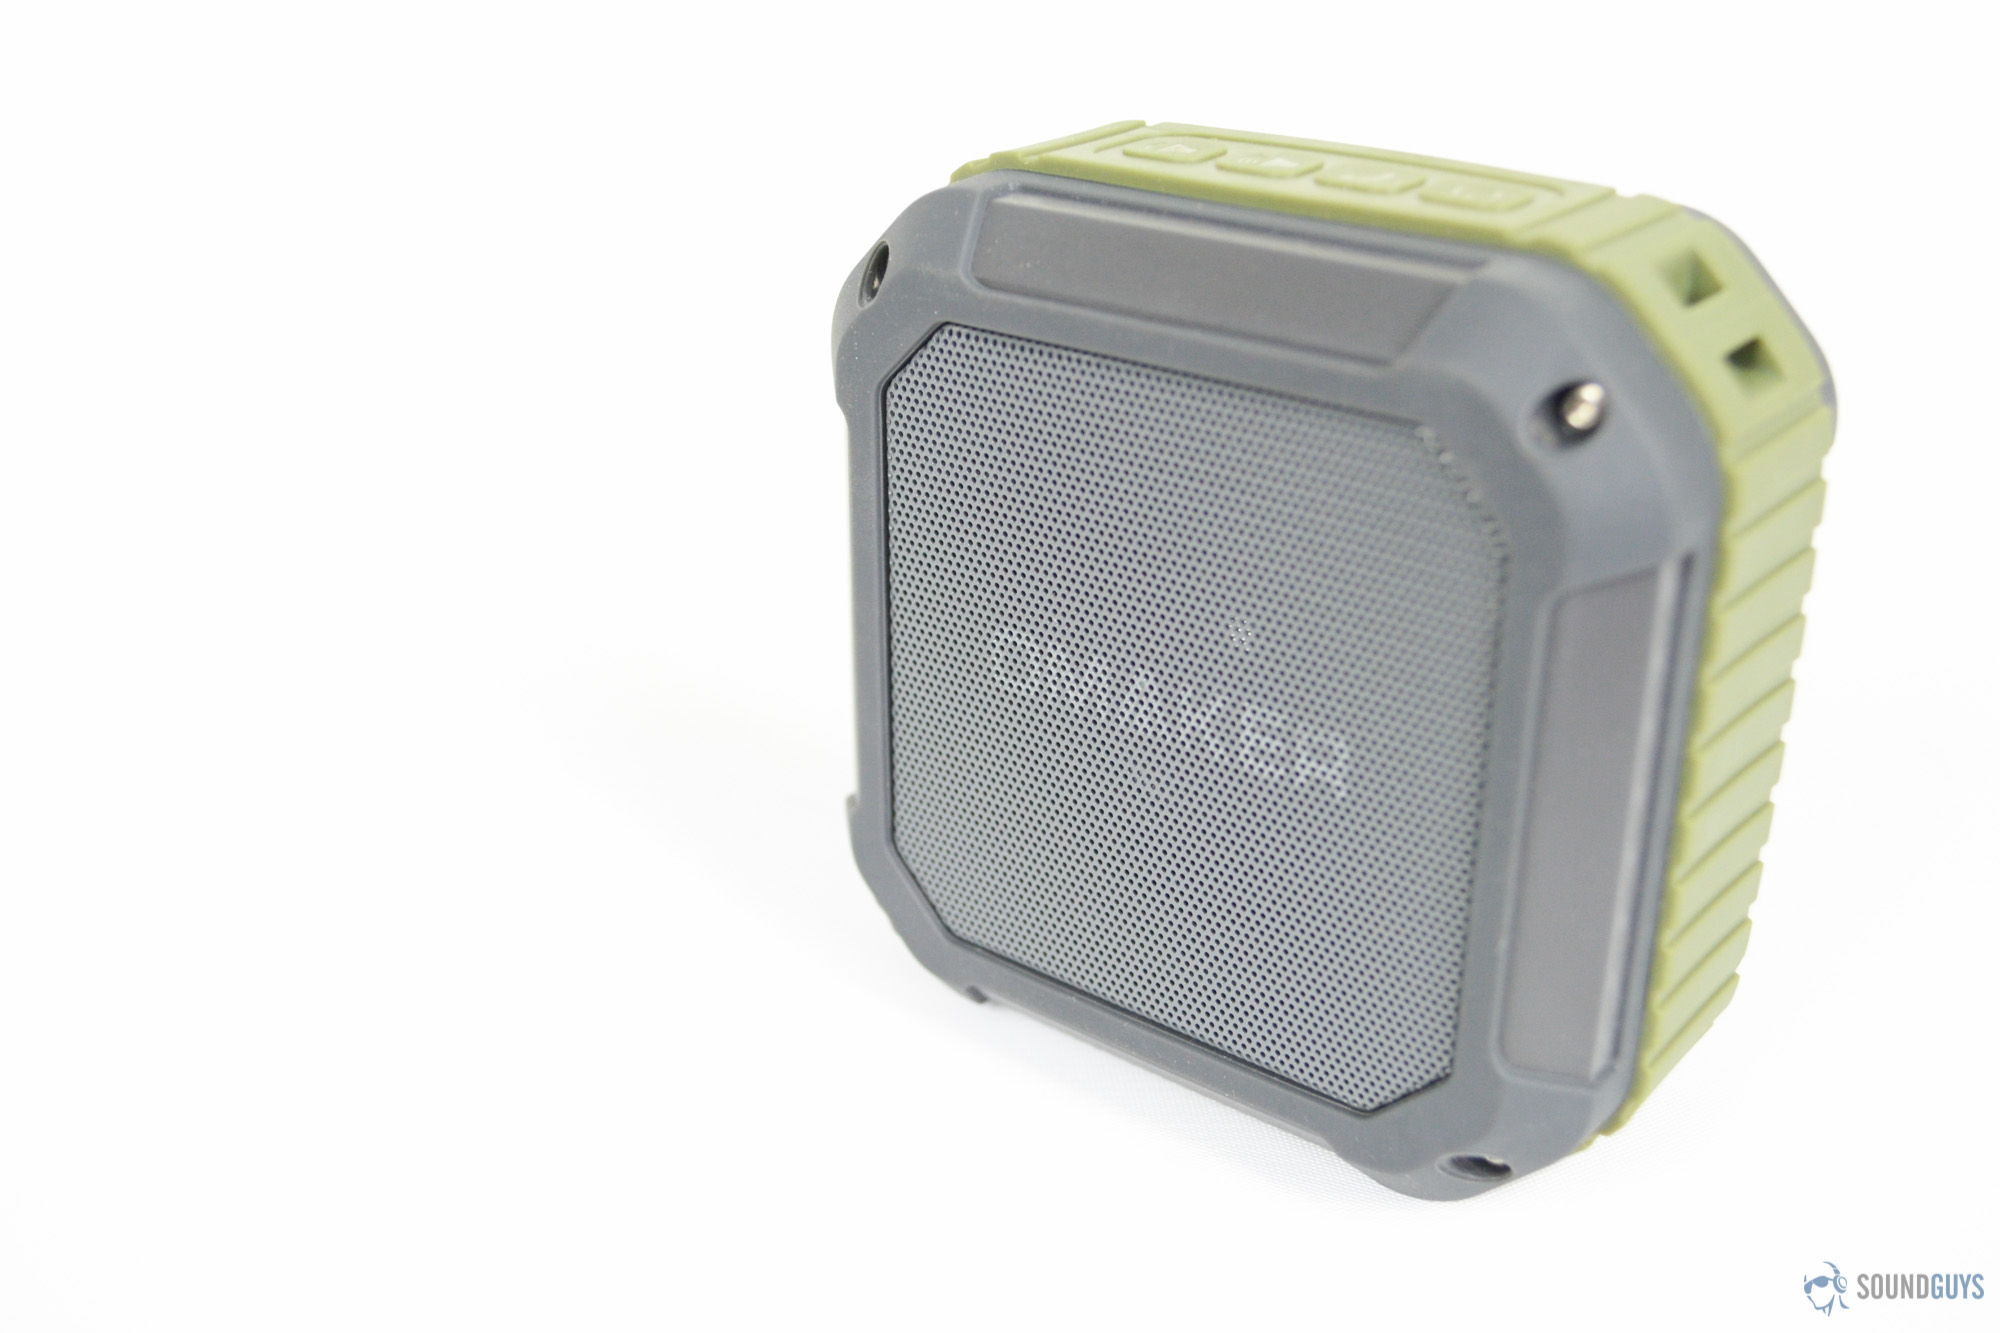 Outfitted with a 5 watt driver and the ability to swap between three EQ modes, the Omaker M4 is a versatile, affordable option. Pictured: The speaker at an agle to show off the grille and Omaker-branding on a white background.